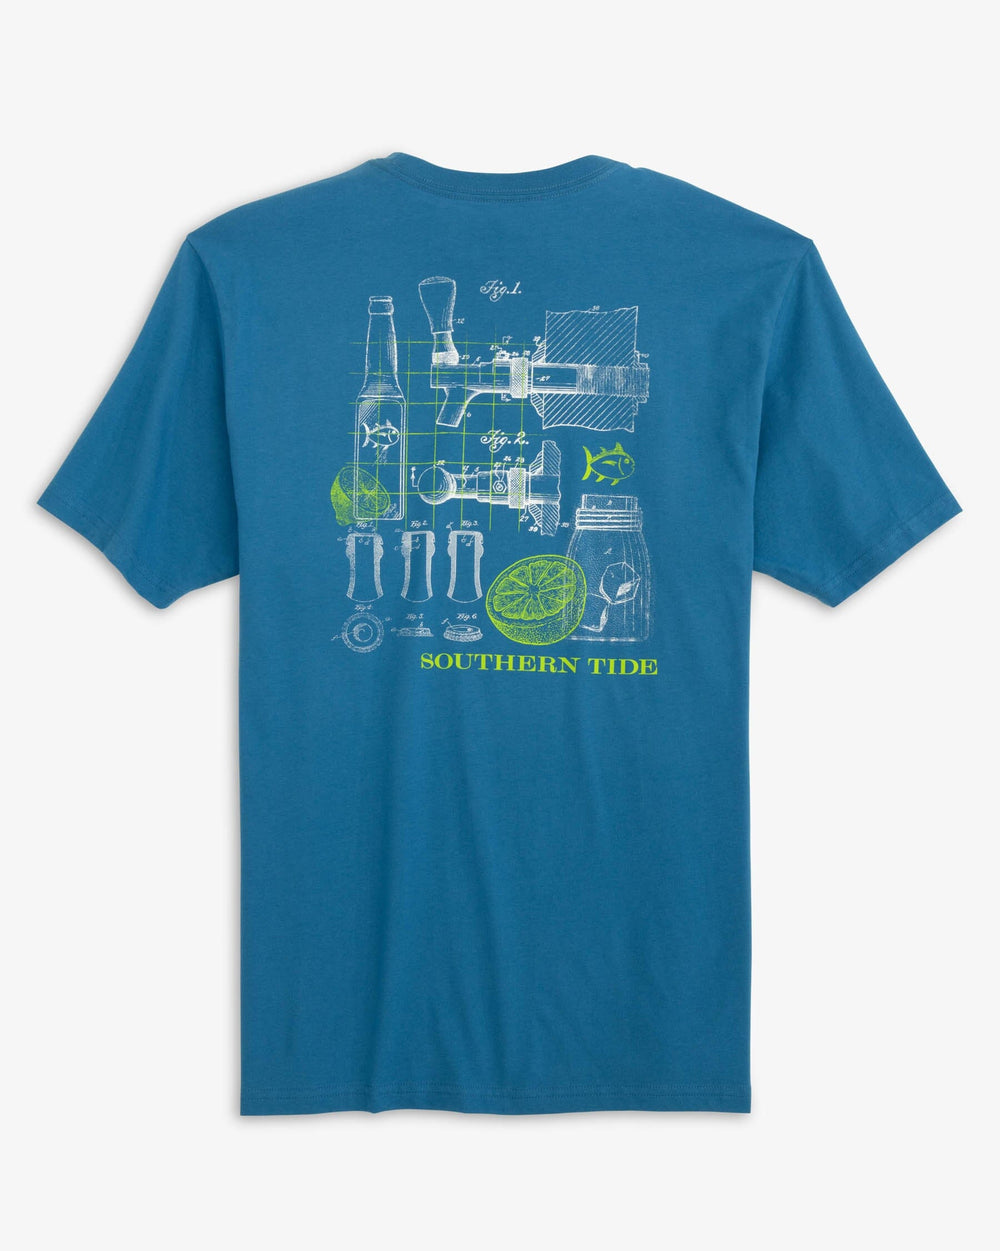 The back view of the Southern Tide Tap Schematic T-Shirt by Southern Tide - Atlantic Blue